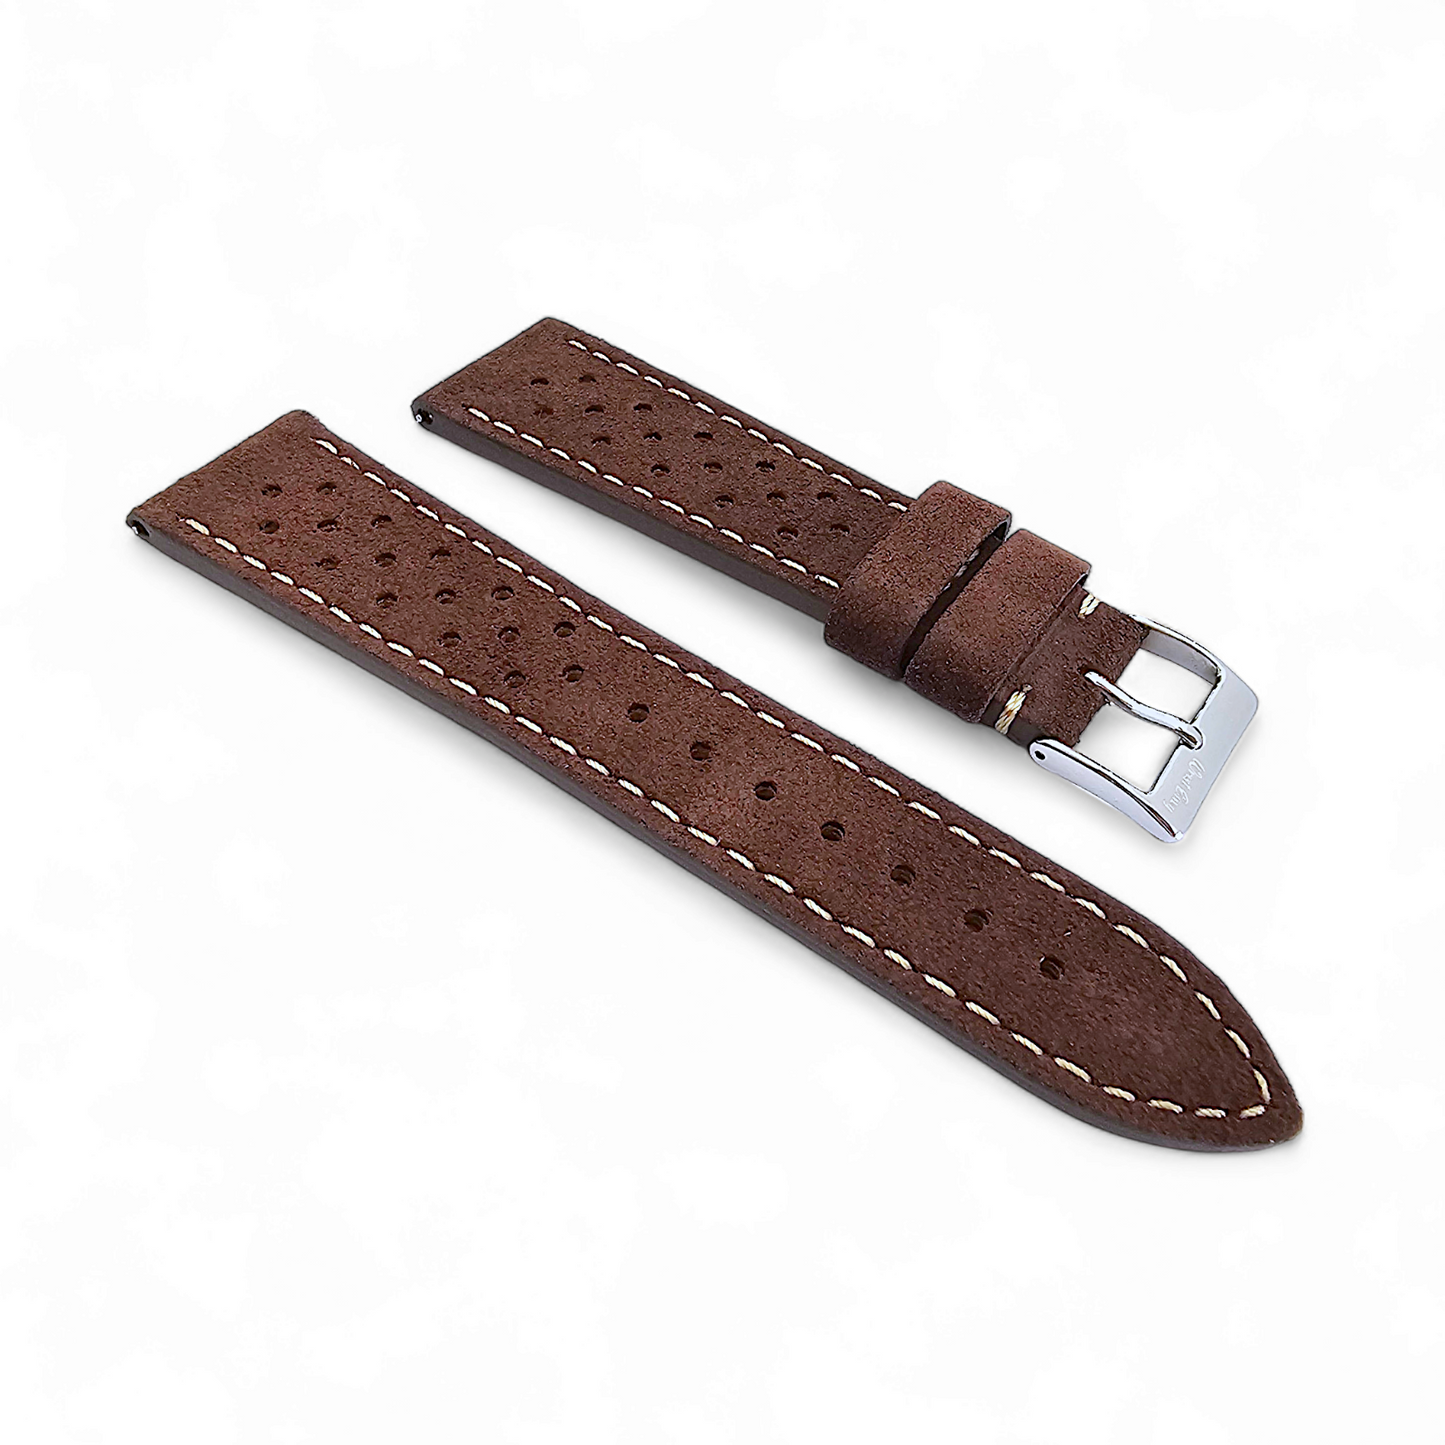 Vintage Italian Suede Watch Strap Rally Racing Chocolate Brown 20mm 22mm